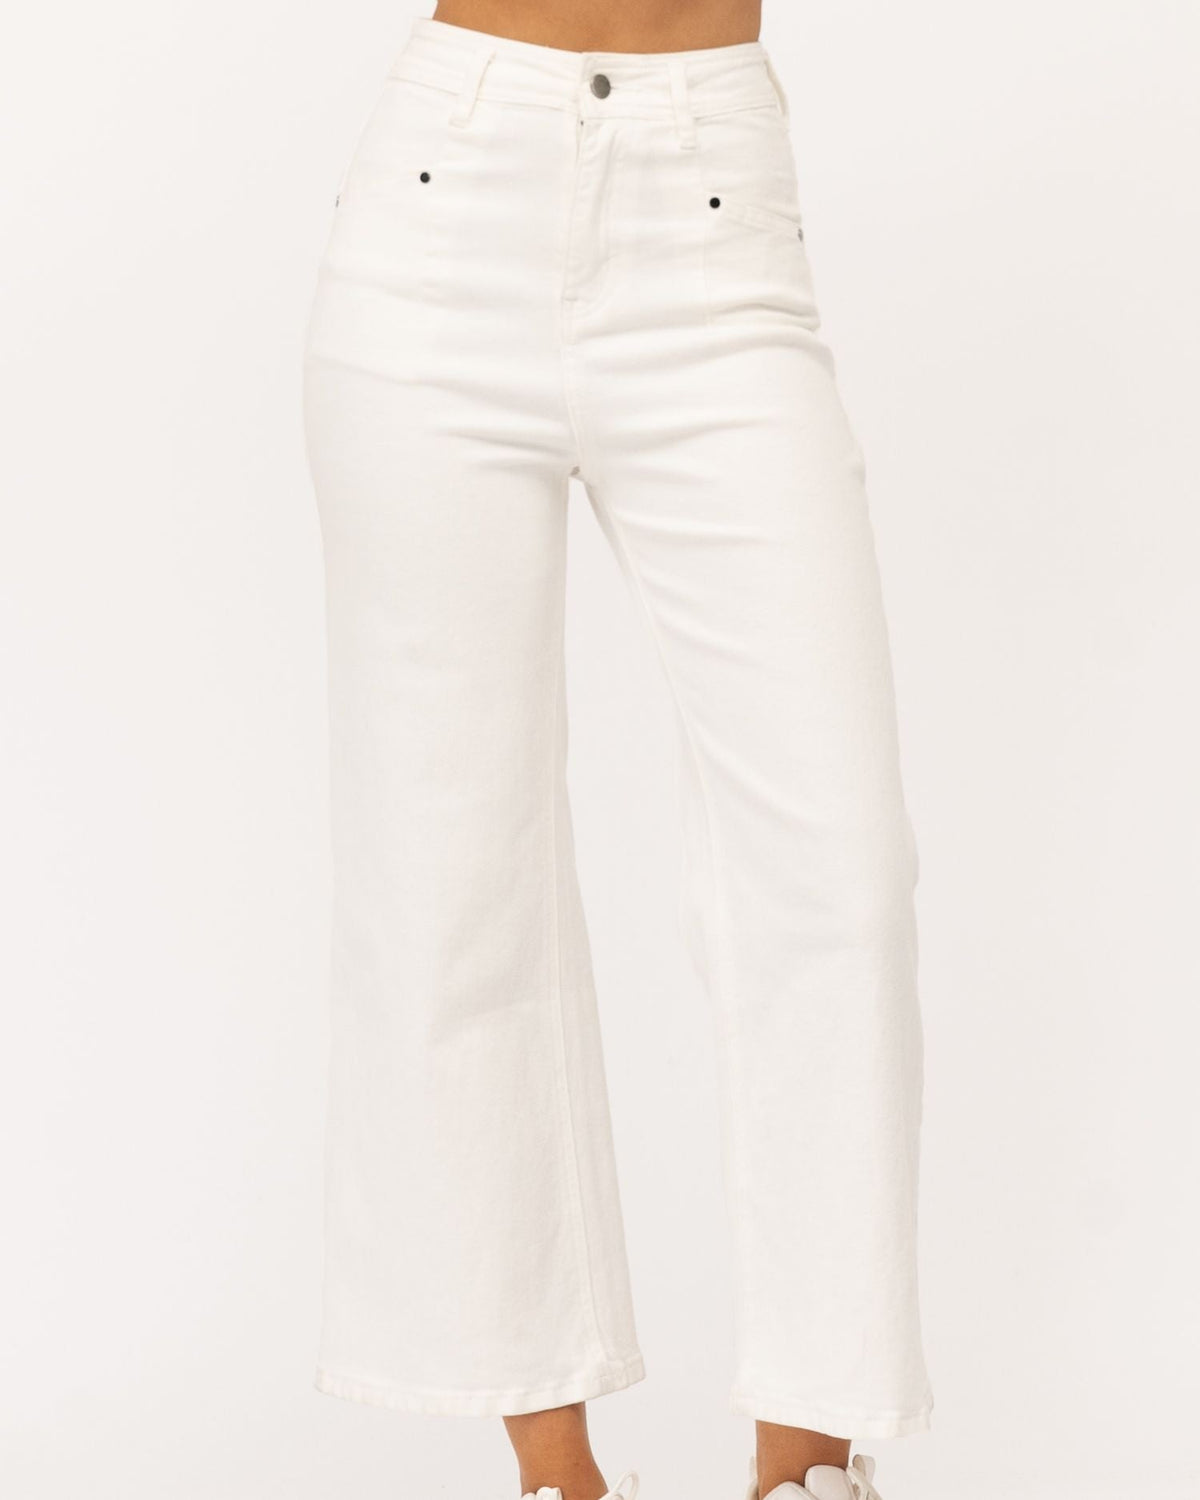 A girl wearing white cropped wide leg jeans from Paper Heart collection designed by Global Fashion House.